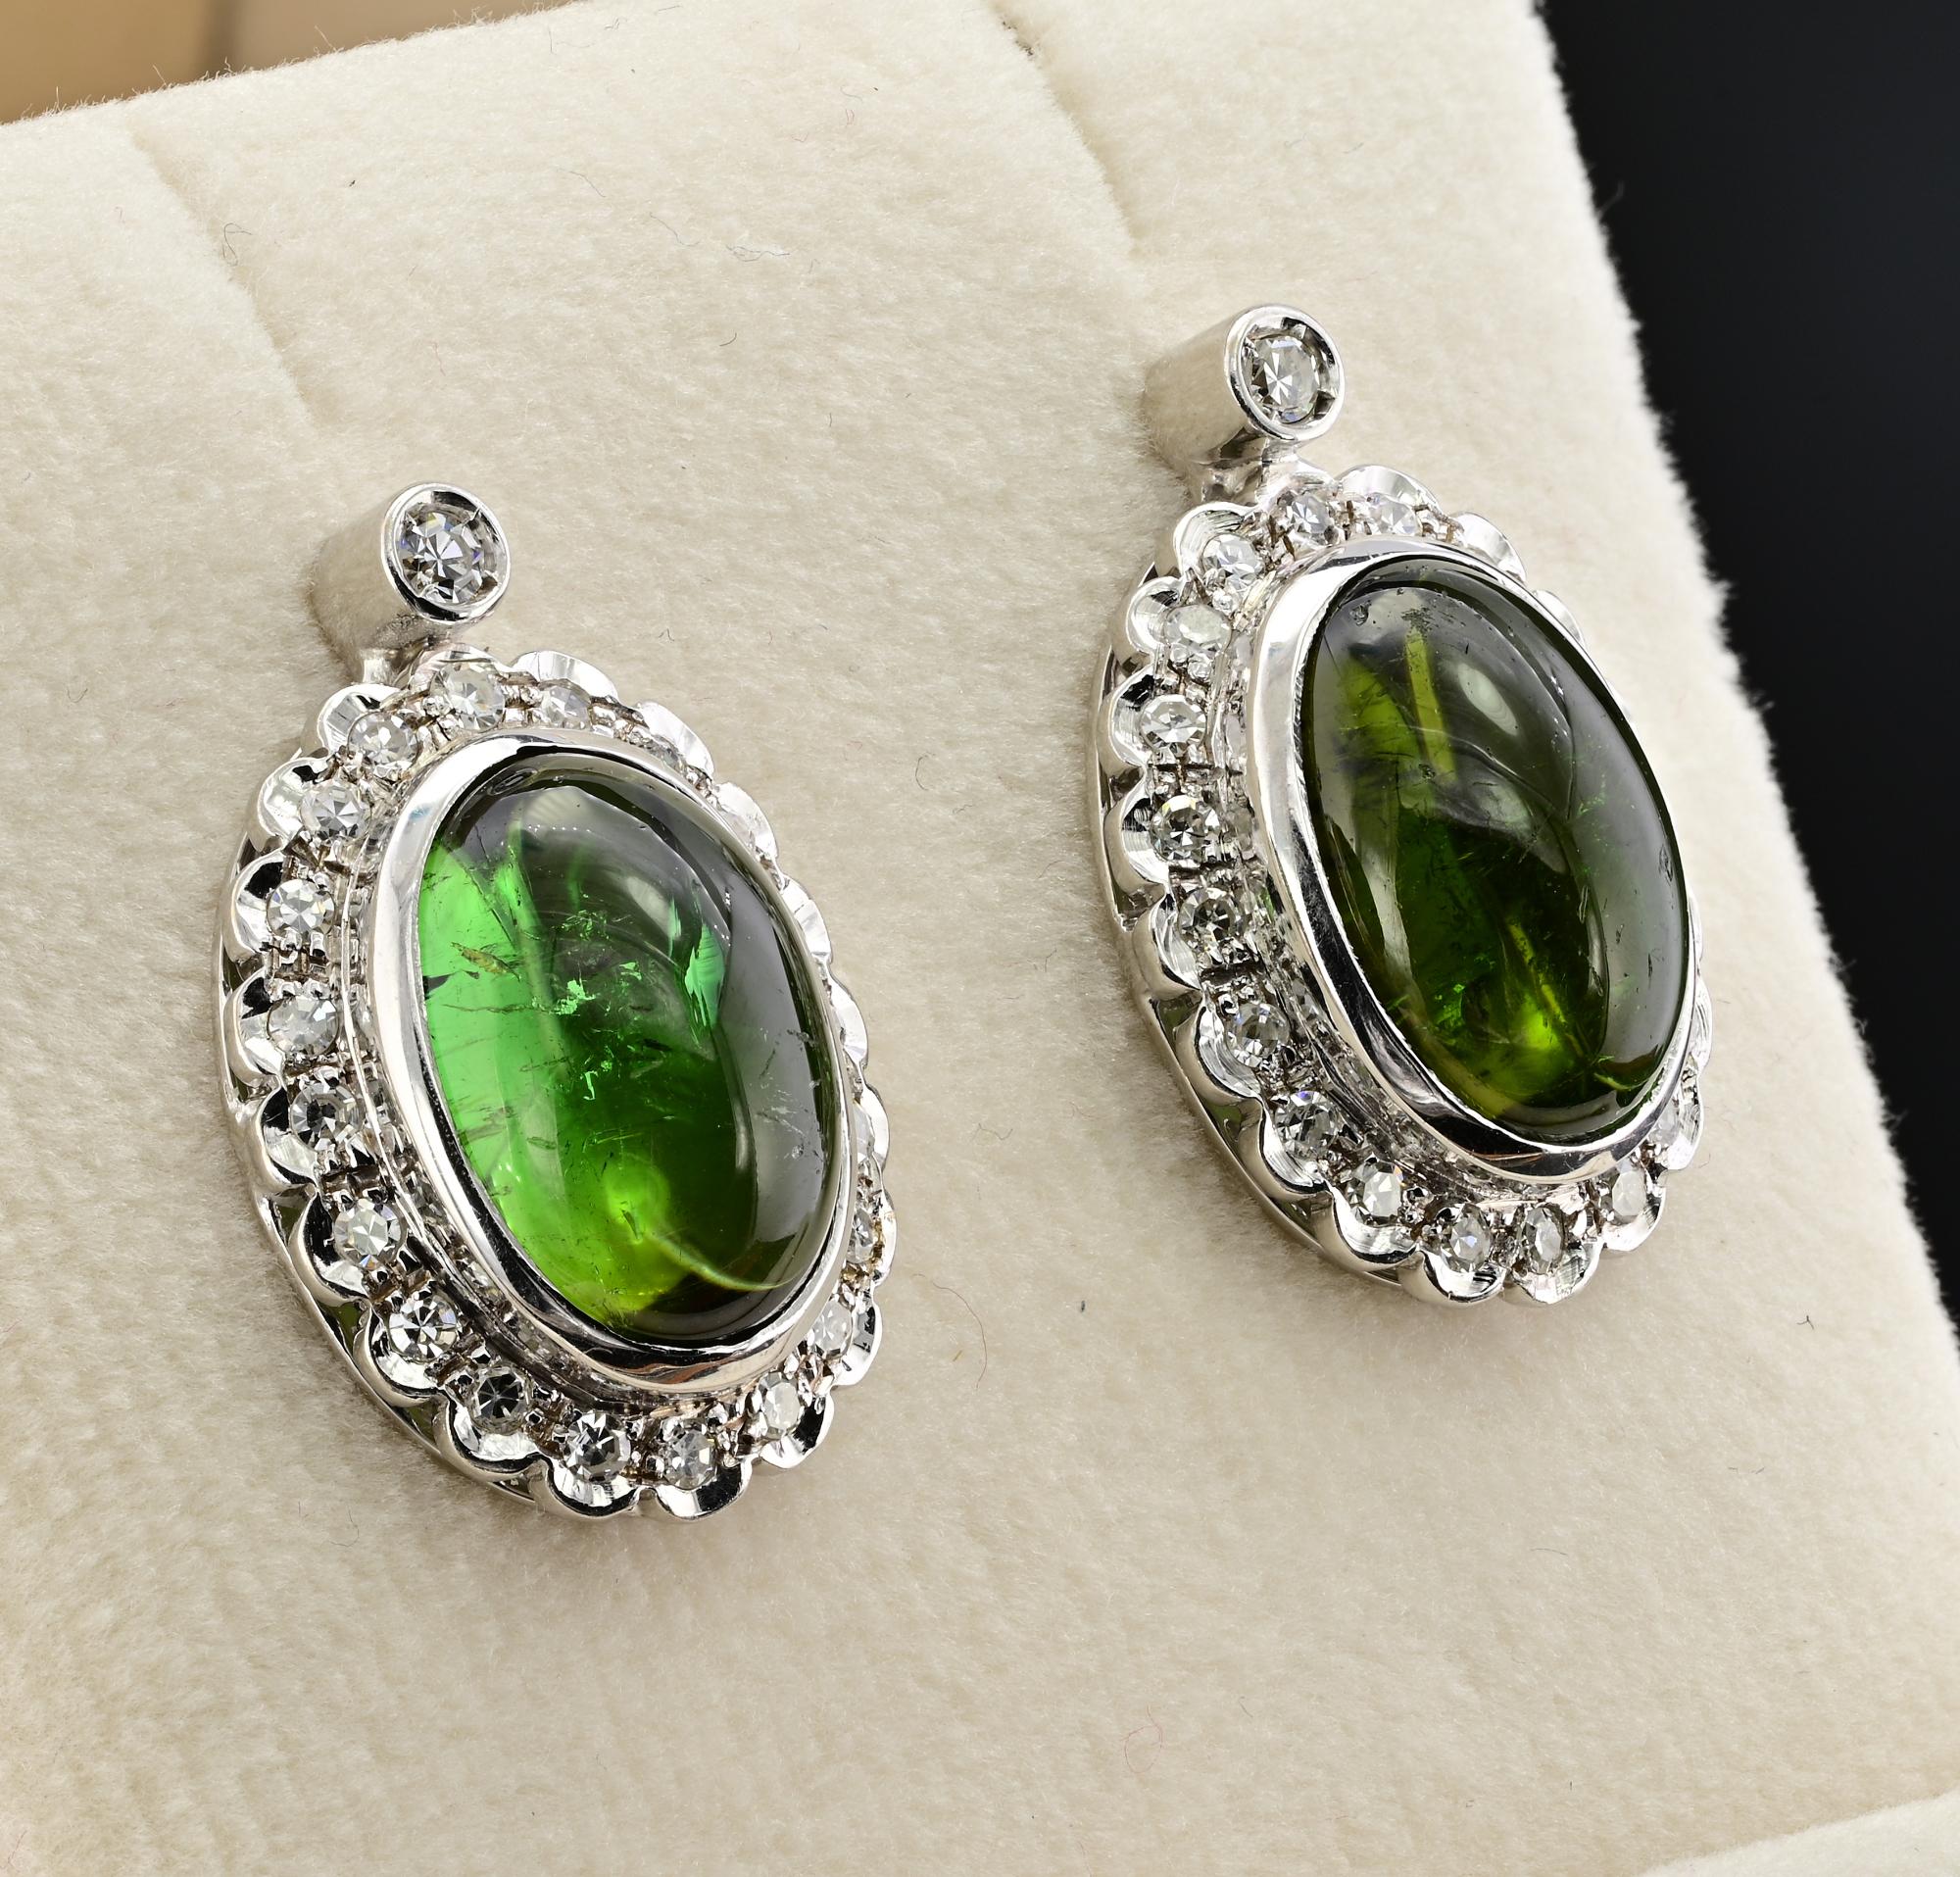 These beautiful mid-century earrings are 1950 circa, hand crafted of solid 18 KT white gold
Charming classy design exalting the oval shape gem set consisting of two natural Green Tourmaline cabochon cut 13.0 Ct for both (13 mm. x 9.14 mm.)  pleasing